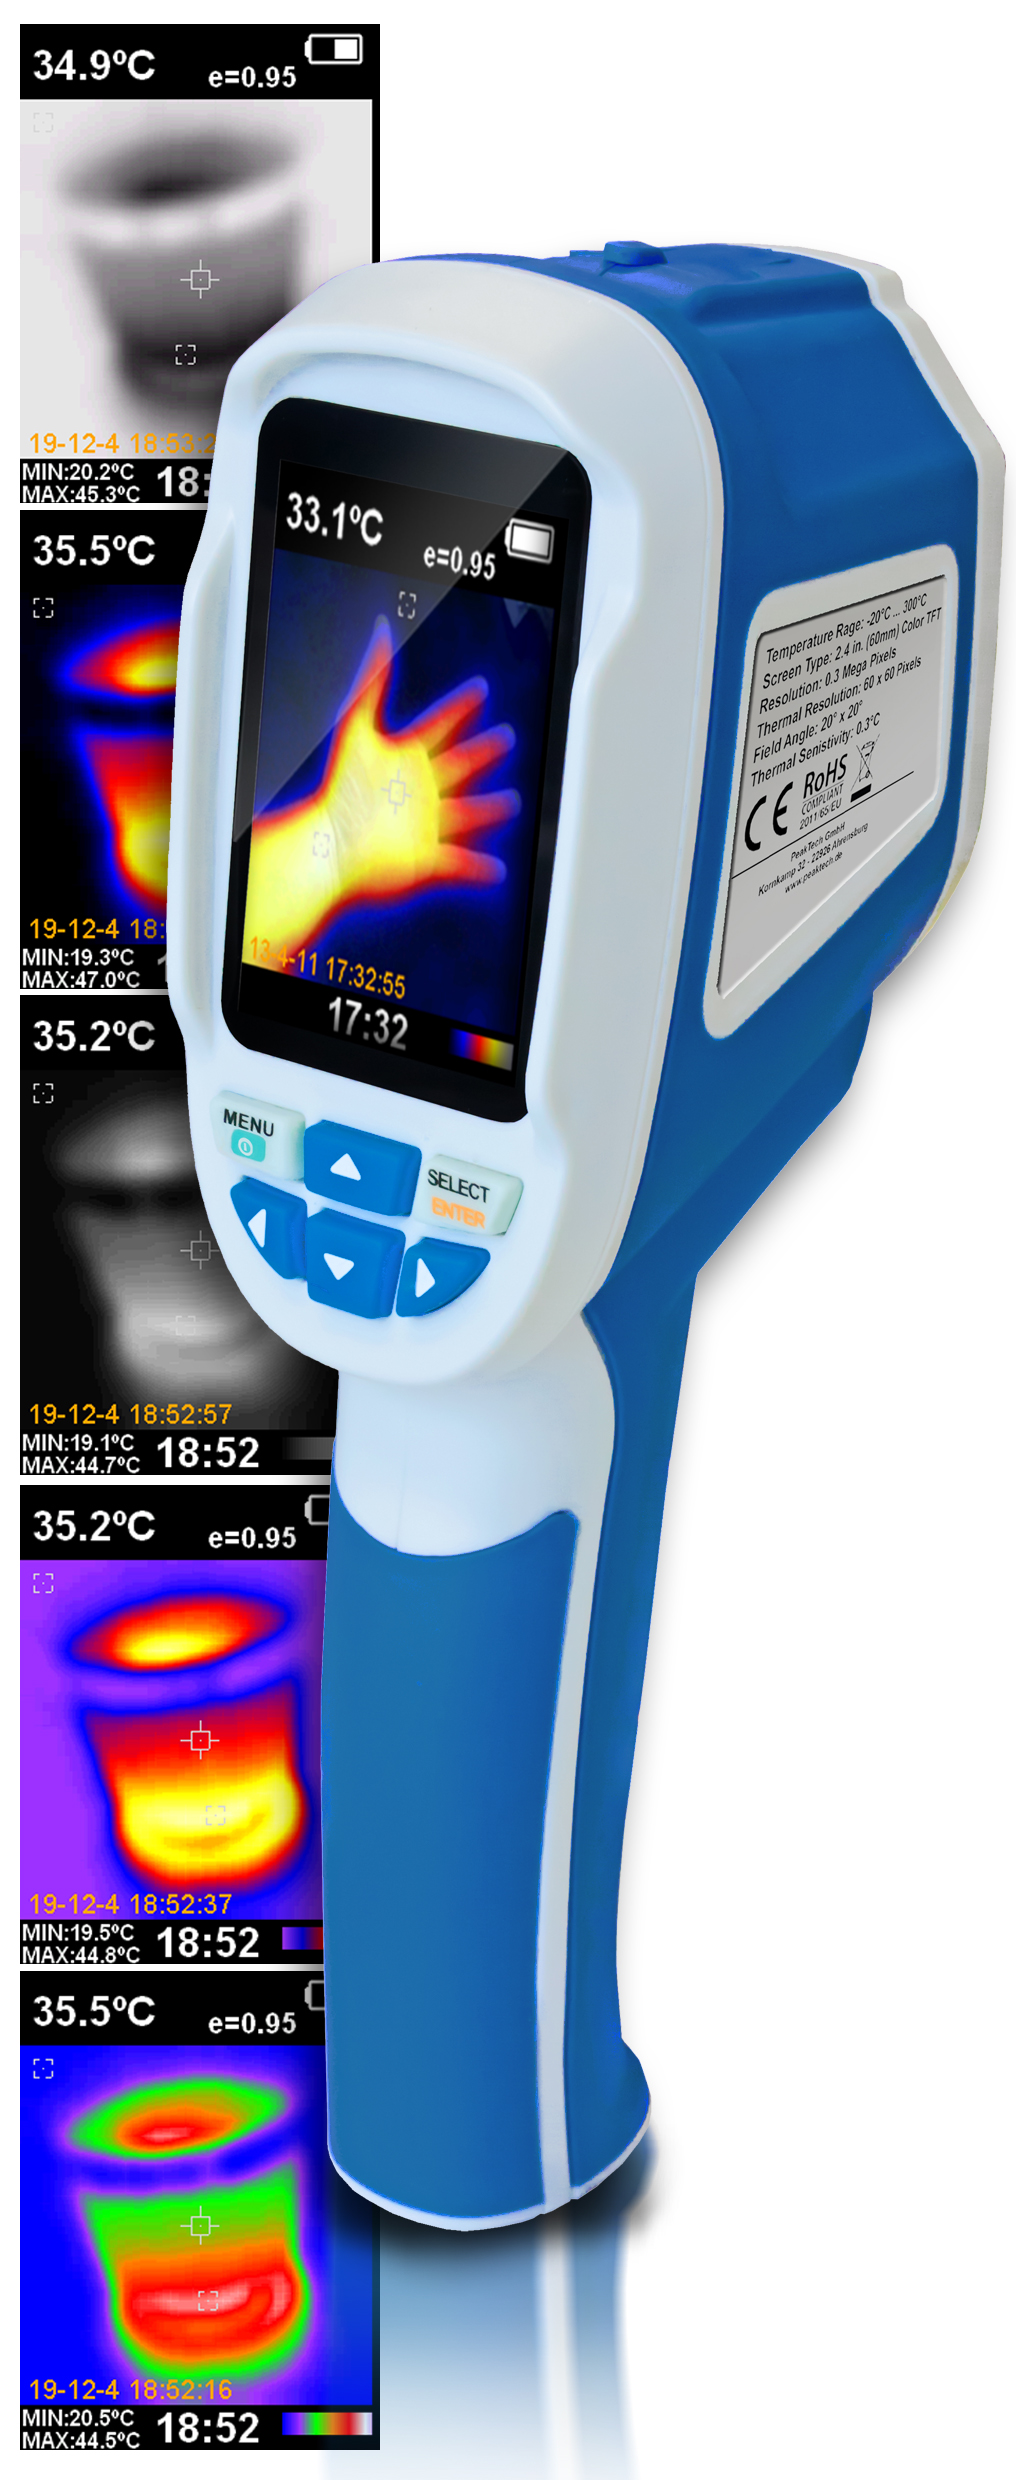 «PeakTech® P 5605» Thermal Imaging Camera, 60 x 60 px.